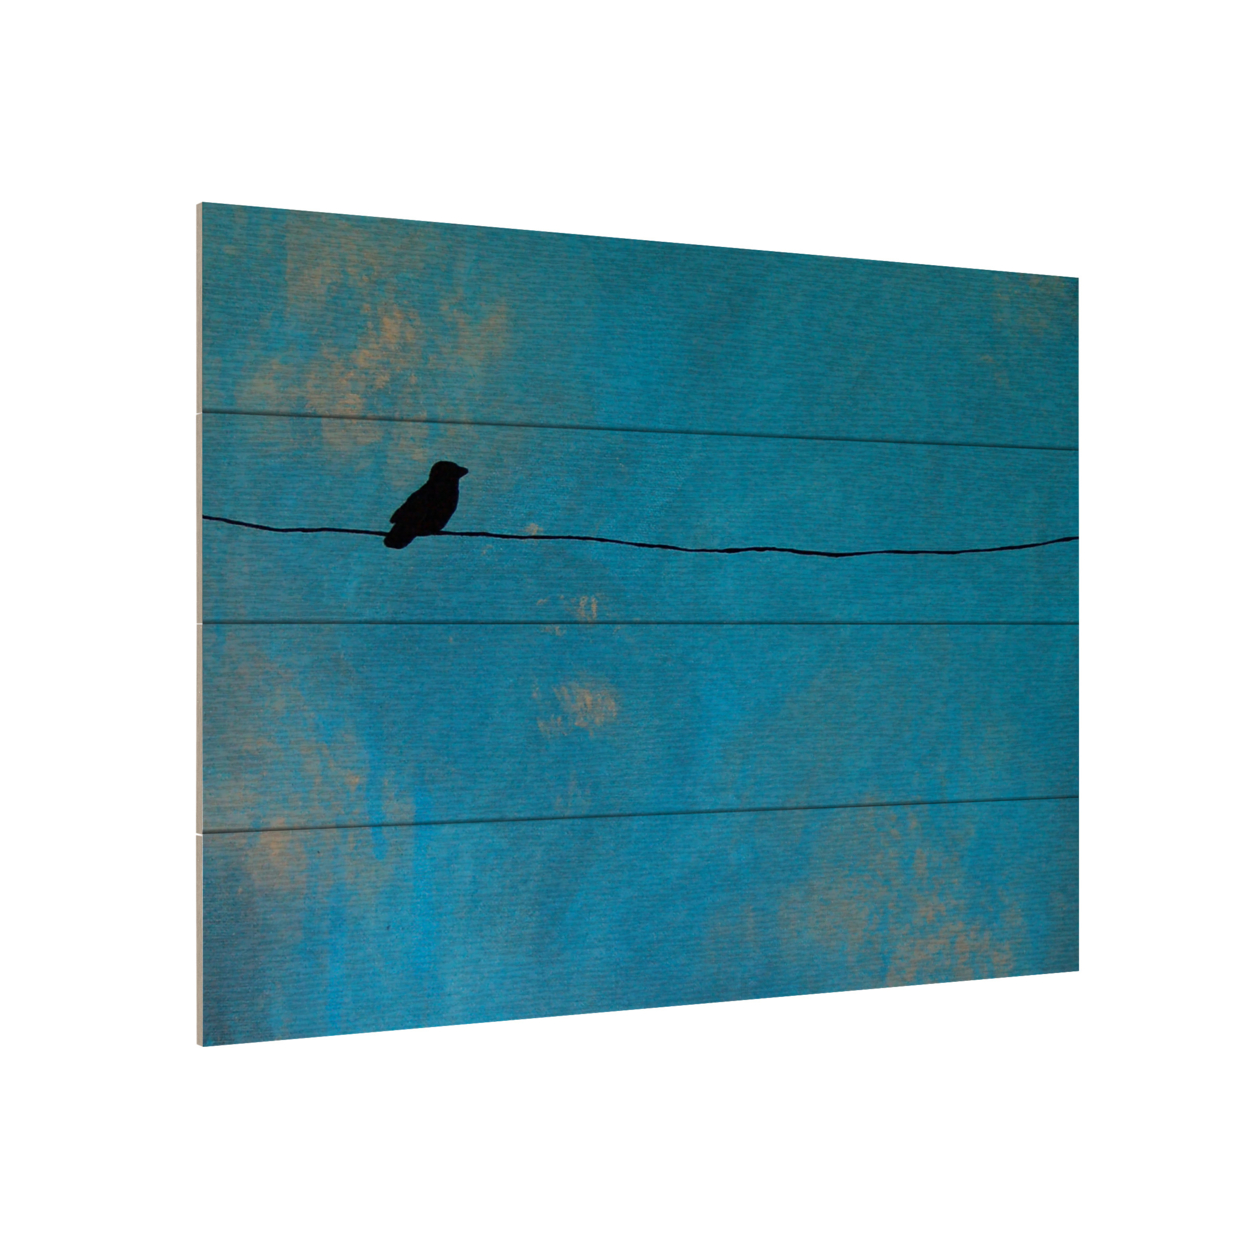 Wall Art 12 X 16 Inches Titled Lone Bird Blue Ready To Hang Printed On Wooden Planks